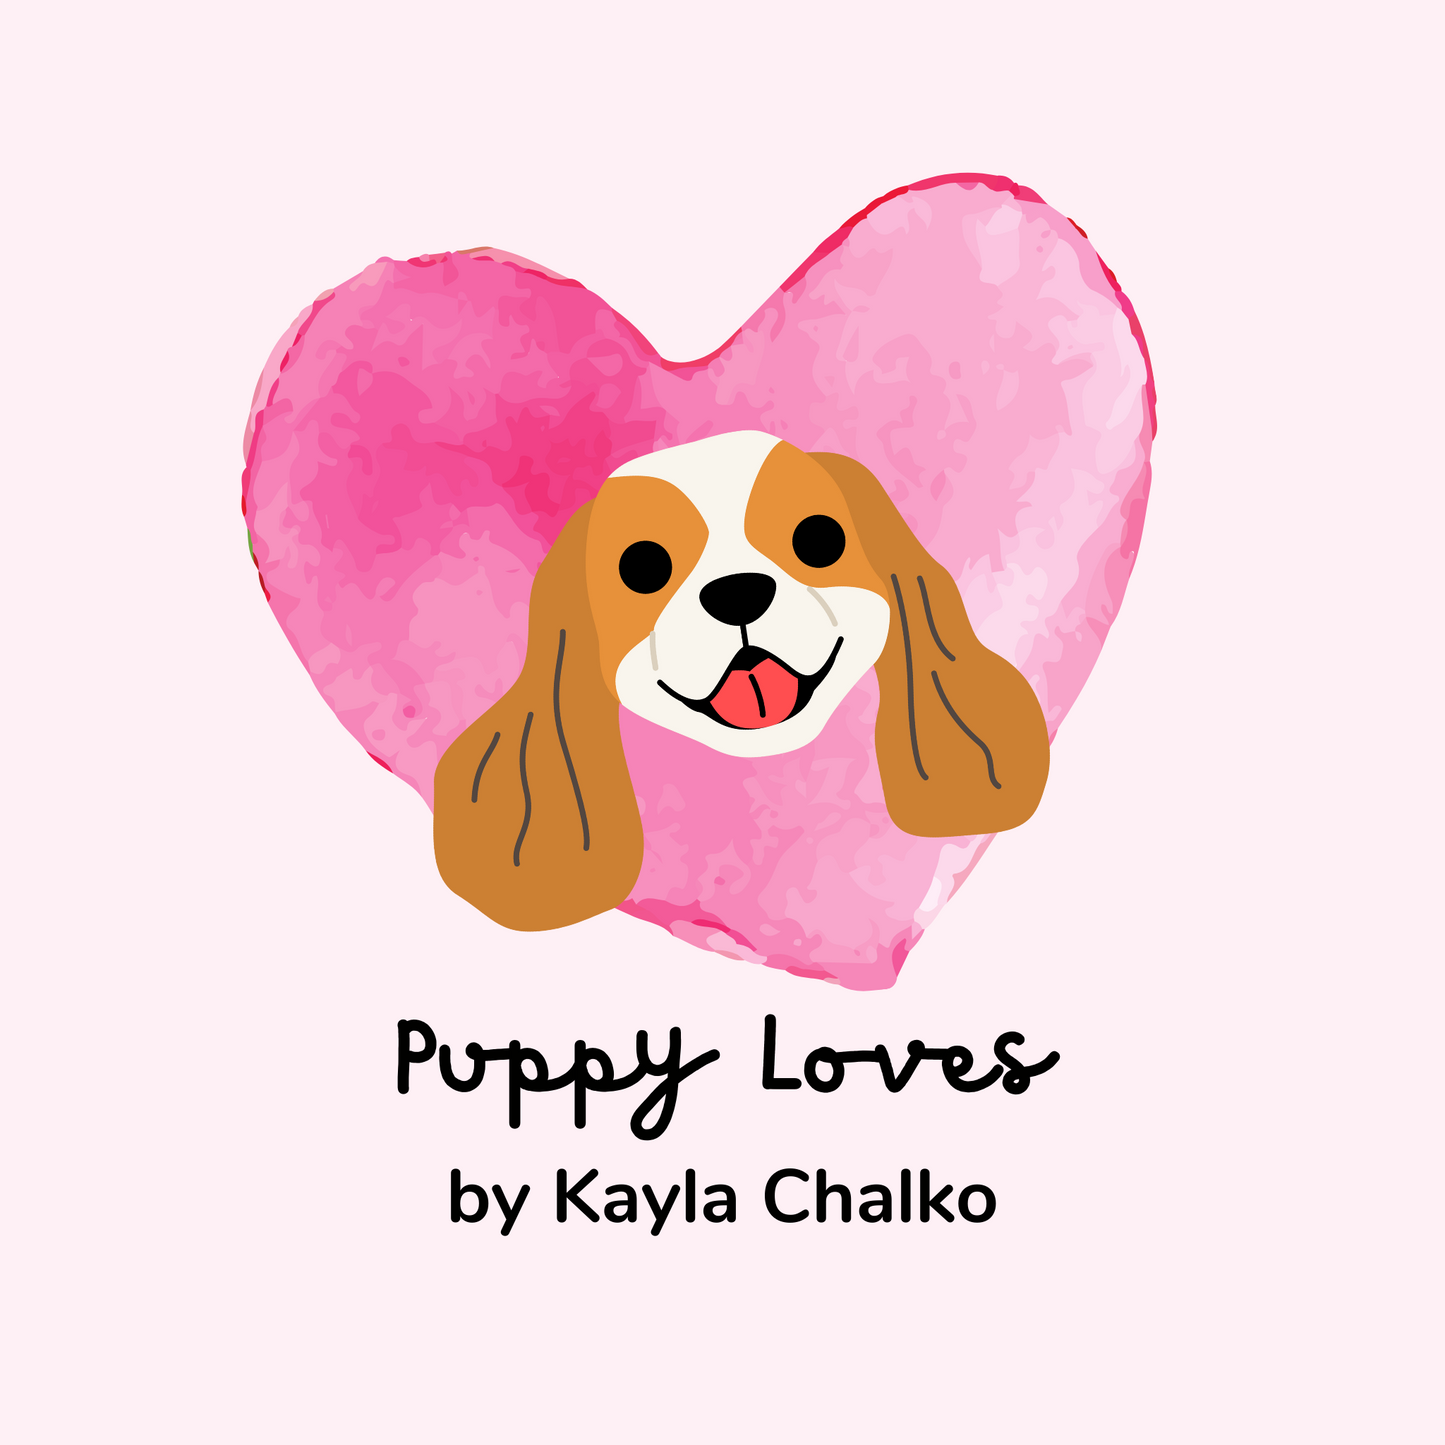 "Puppy Loves" Digital Children's Book for Speech Therapy - Printable